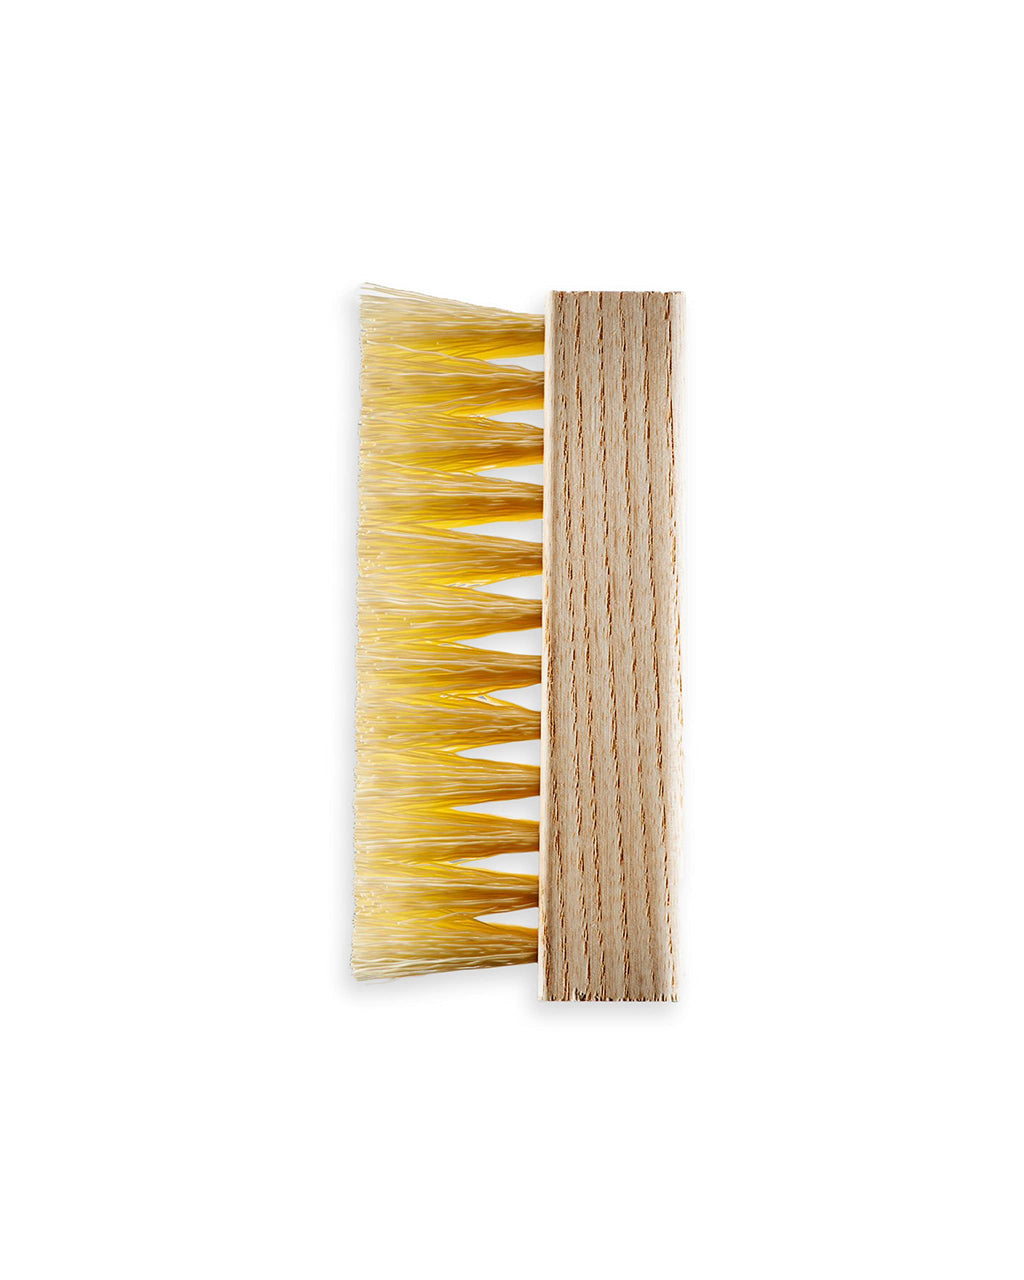 [Australia] - Jason Markk Standard Cleaning Brush - Handcrafted Wood Handle - Synthetic Bristles - Tough on Stubborn Stains & Dirt on Midsoles - Great for All-Around Shoe Cleaning - Works on Most Materials Standard Brush 